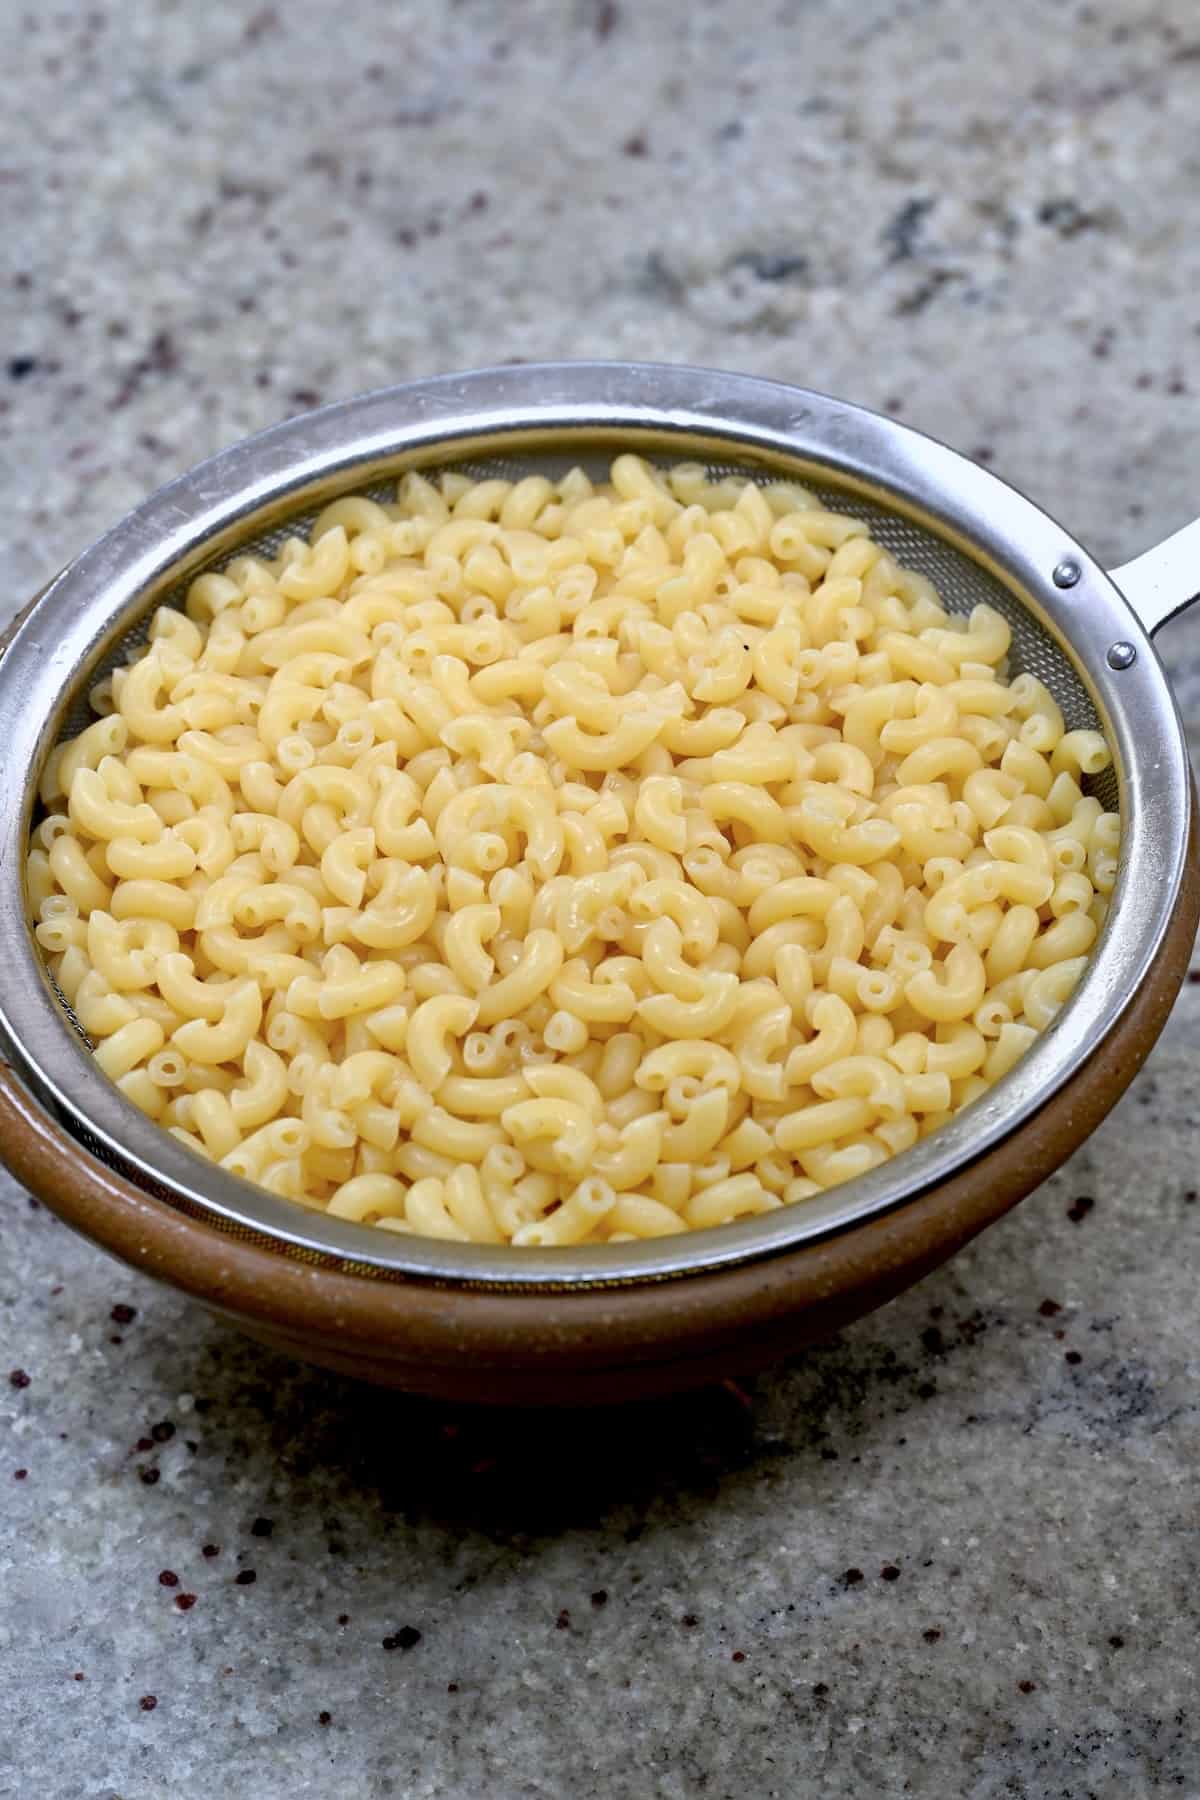 Boiled elbow pasta in a bowl